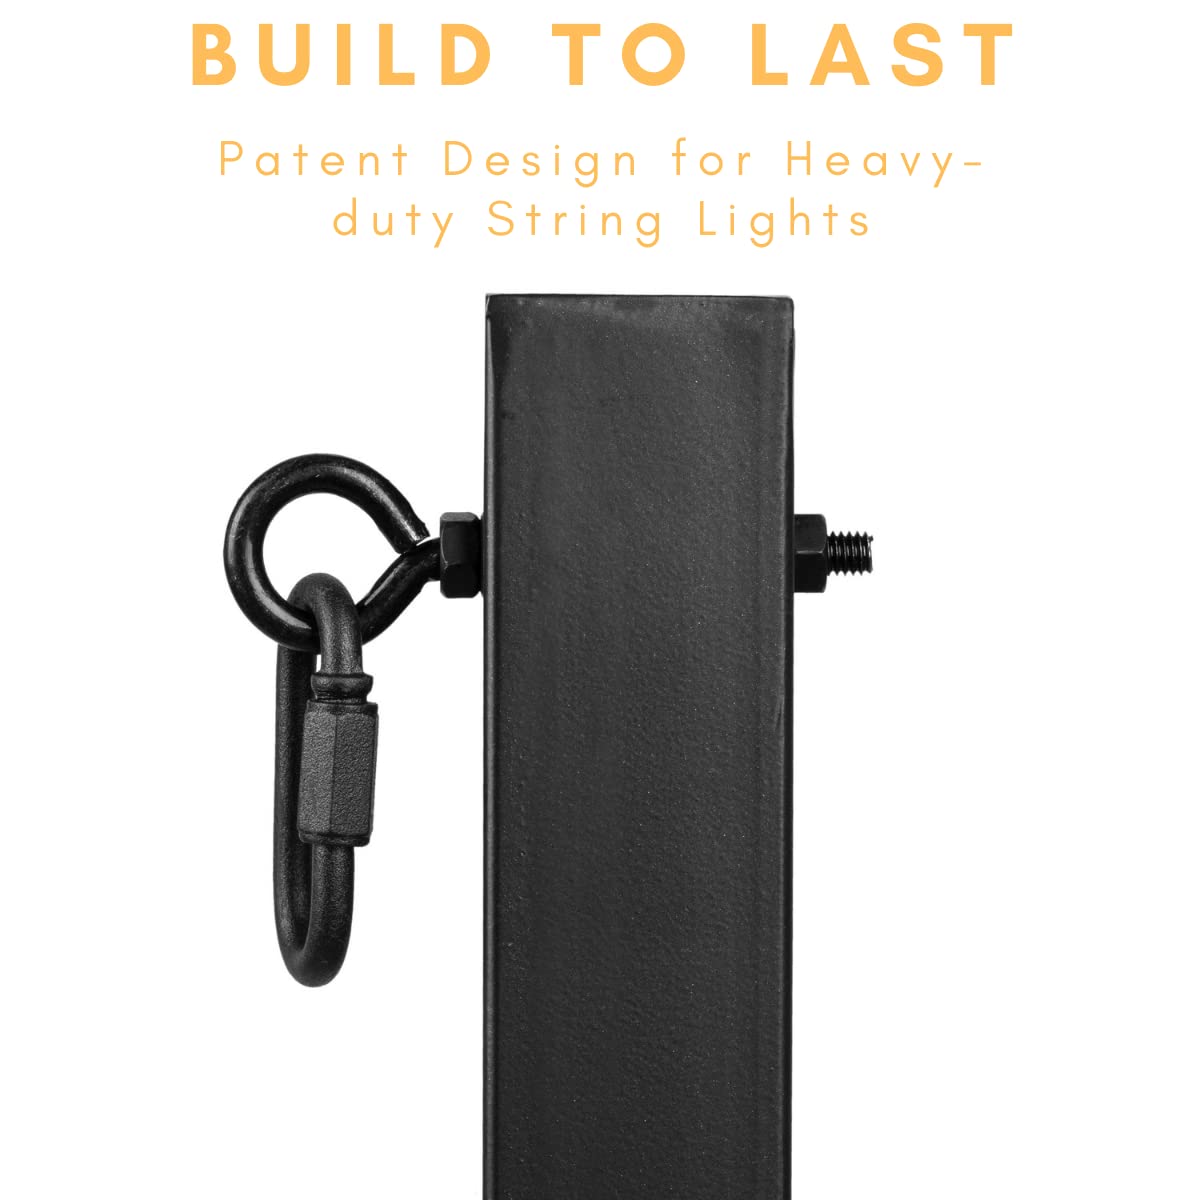 Meruzy String Light Poles 2 Pack - Outdoor Metal Posts with Hooks for Hanging String Lights - Garden, Backyard, Patio Lighting Stand Mounted on Brick Wall, Concrete Wall and Wood Top Rail